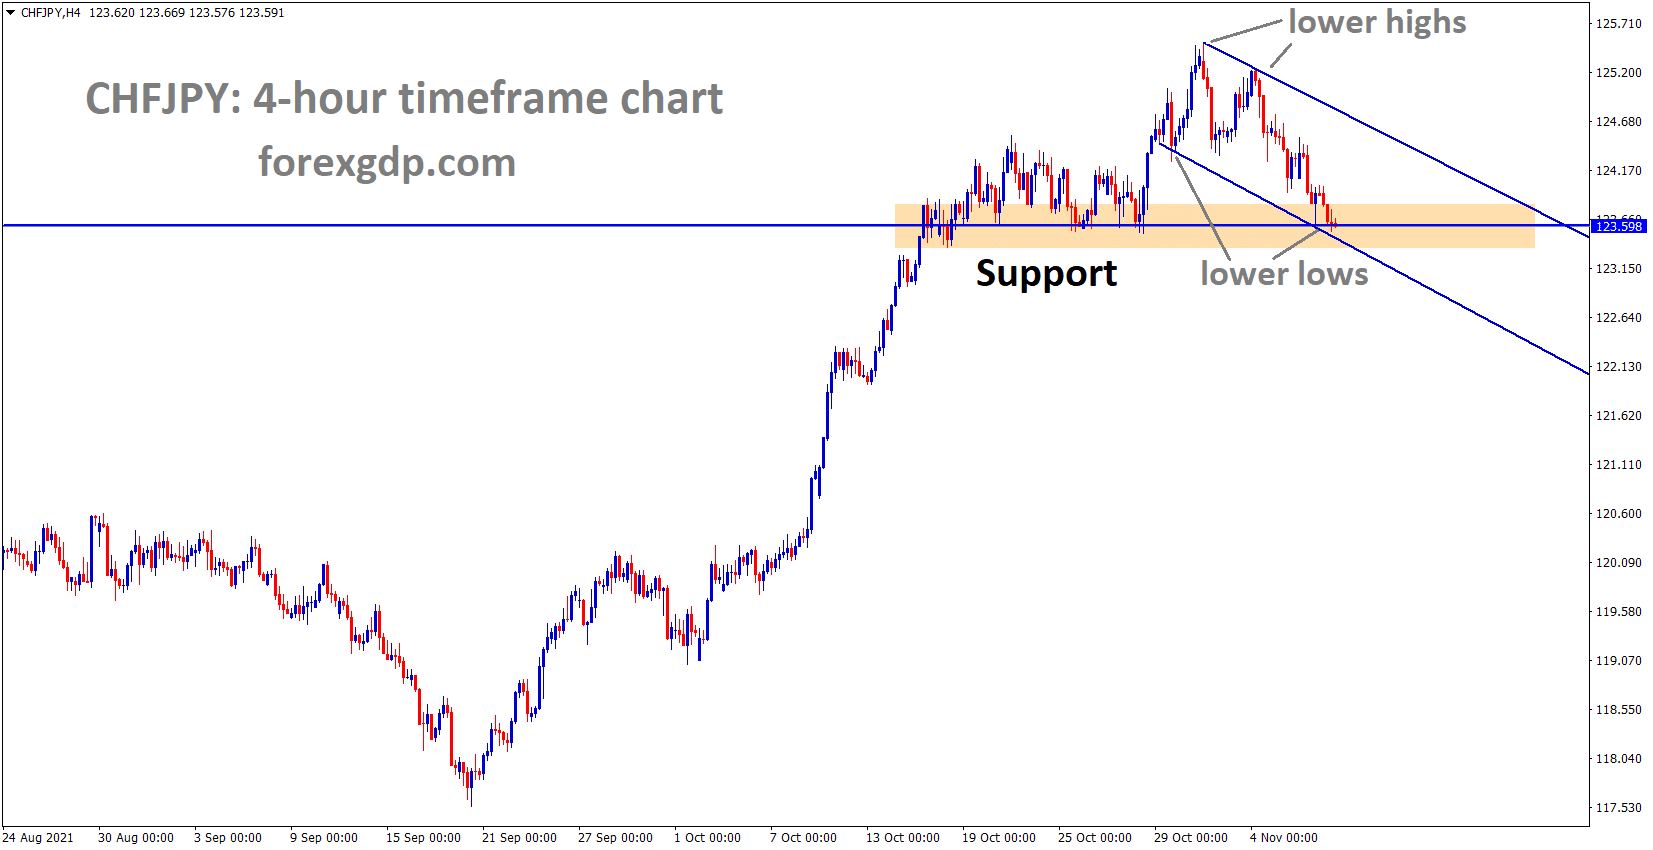 CHFJPY is moving in the Descending channel and reached the recent support area